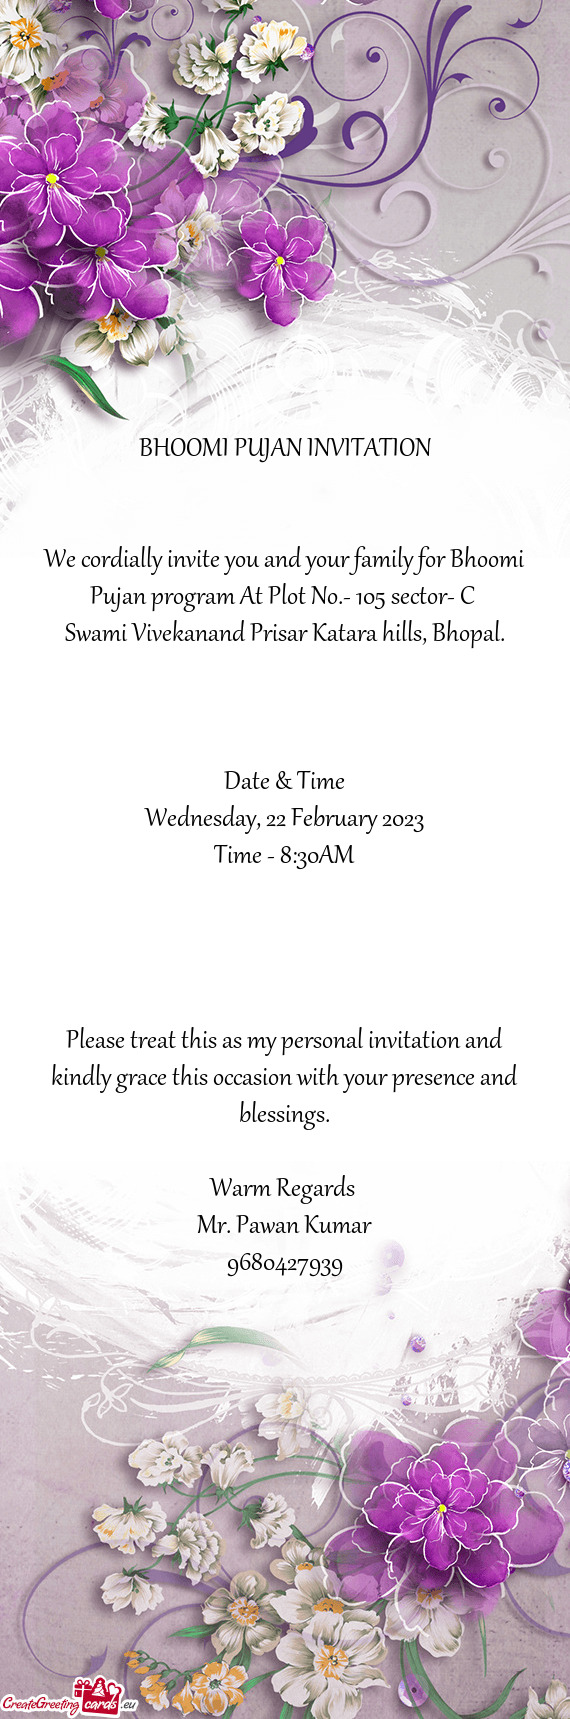 We cordially invite you and your family for Bhoomi Pujan program At Plot No.- 105 sector- C